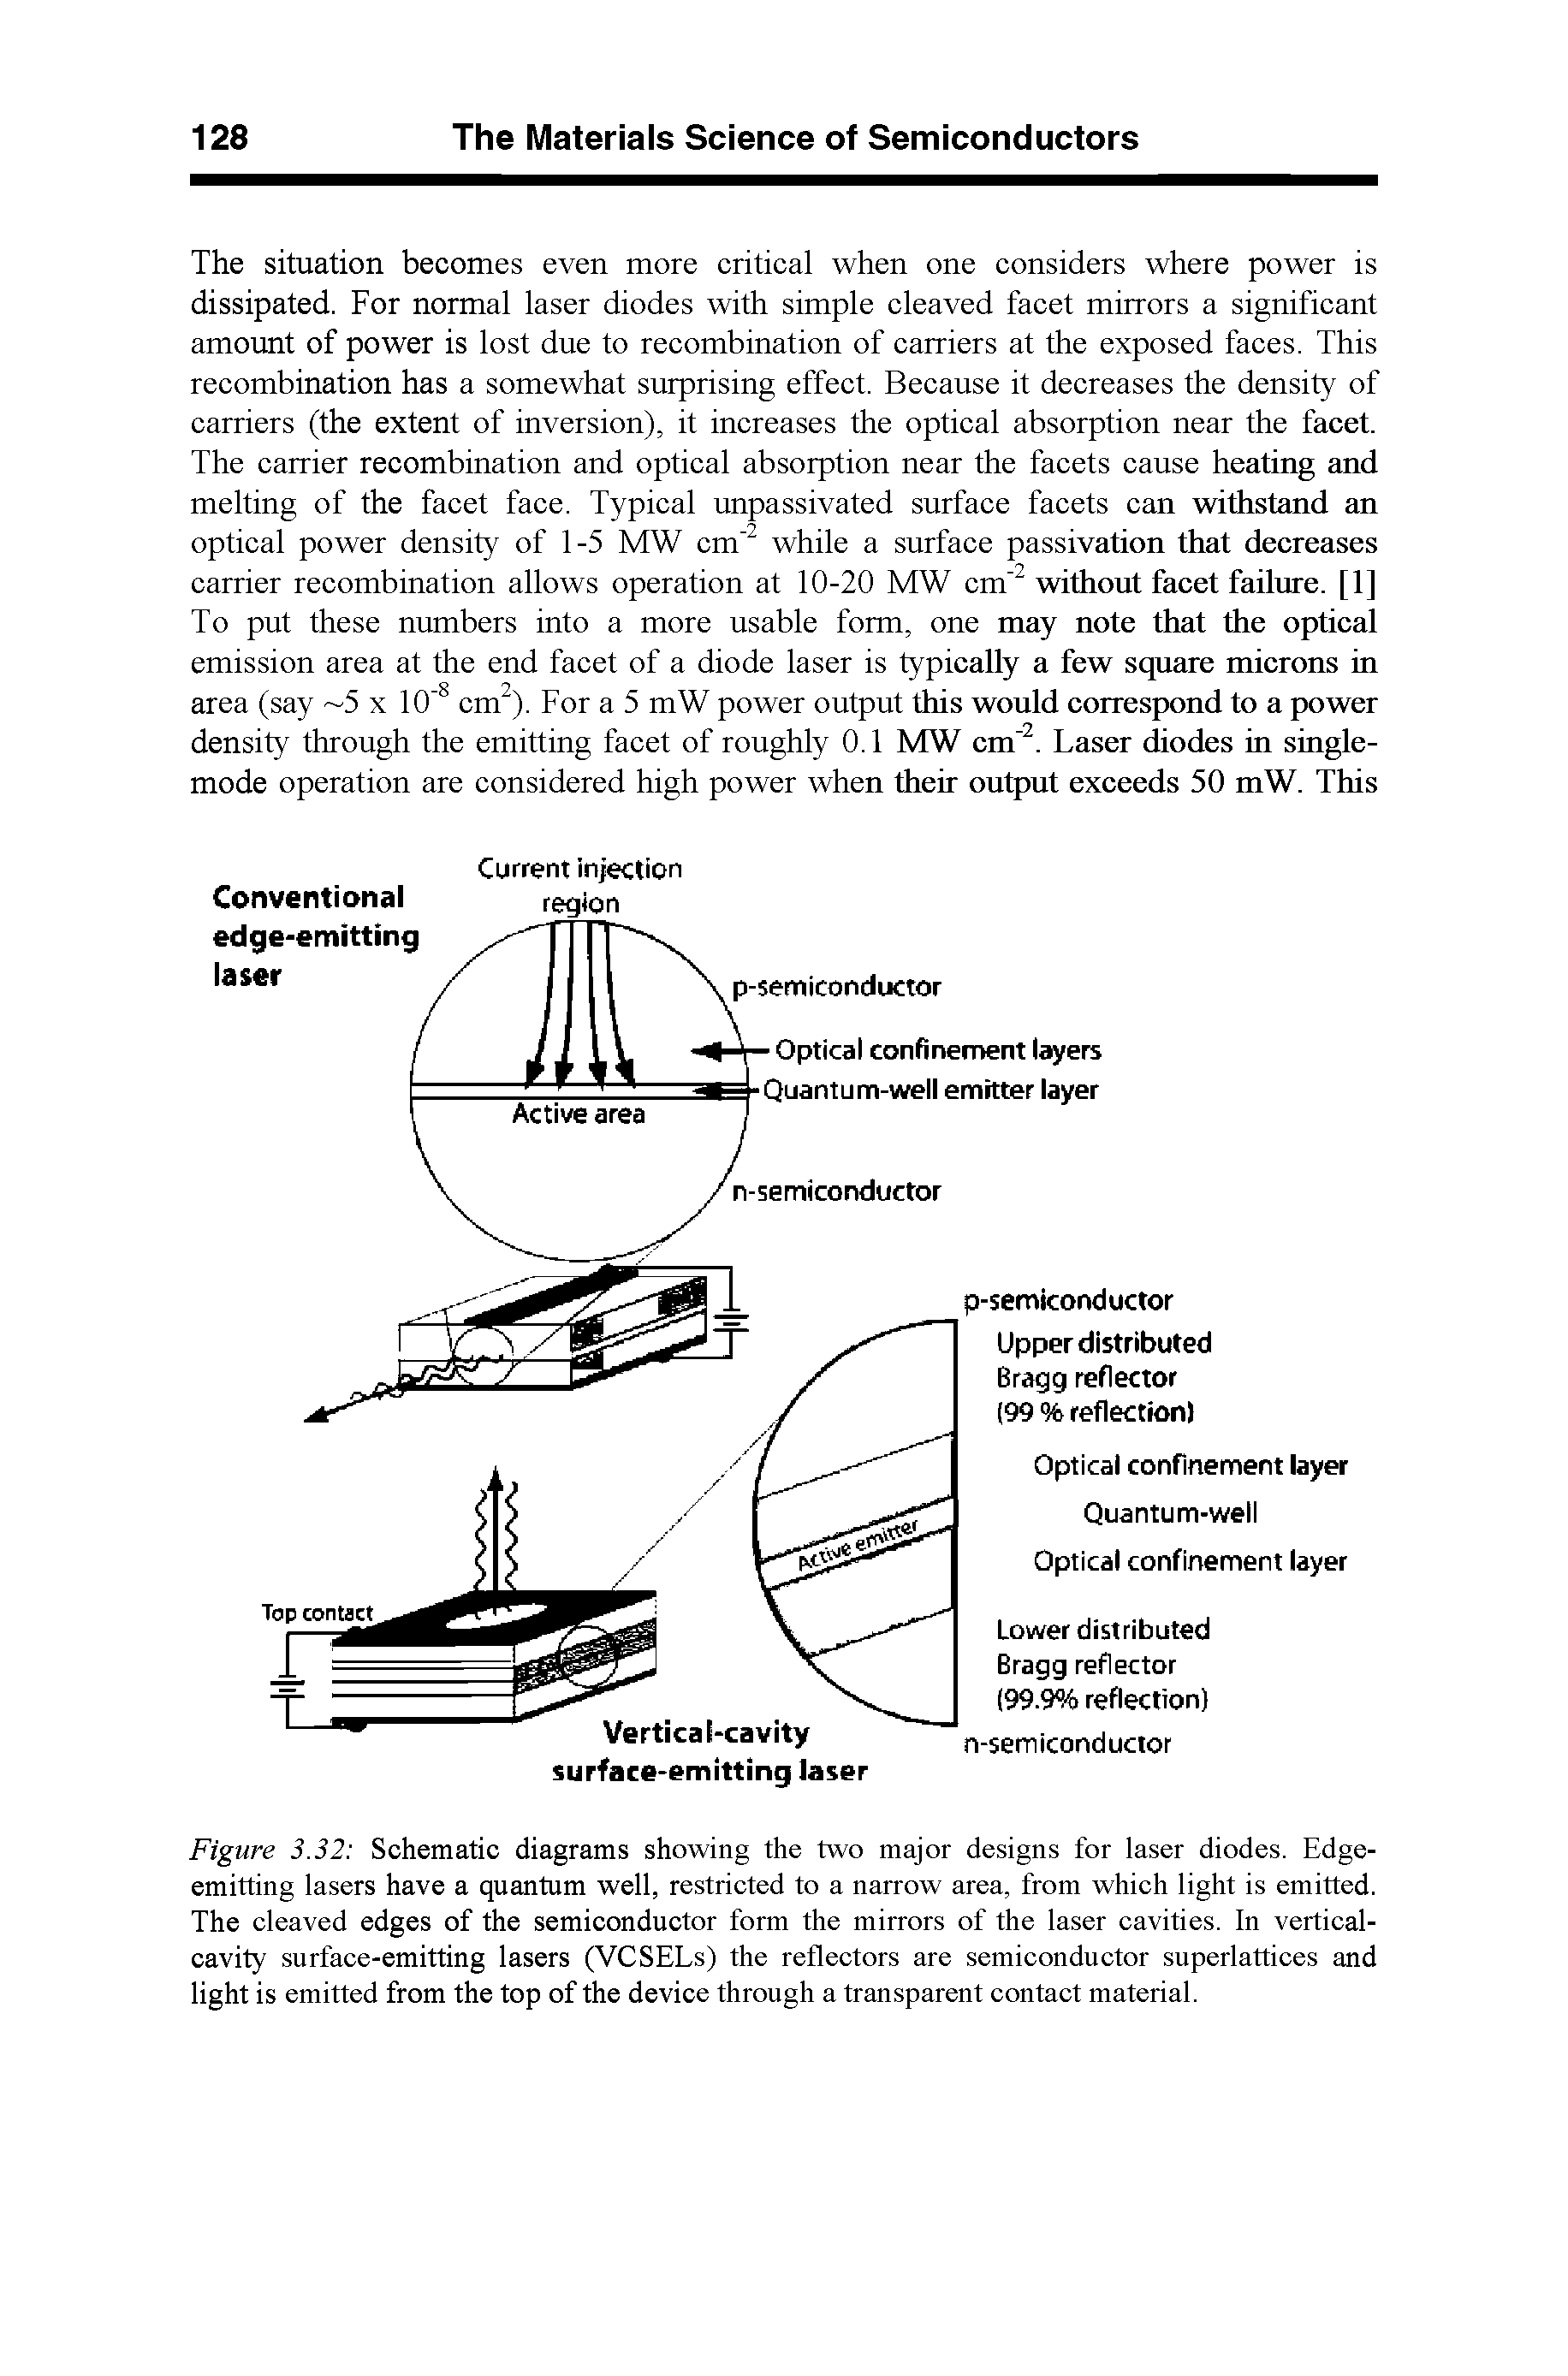 Figure 3.32 Schematic diagrams showing the two major designs for laser diodes. Edge-emitting lasers have a quantum well, restricted to a narrow area, from which light is emitted. The cleaved edges of the semiconductor form the mirrors of the laser cavities. In vertical-cavity surface-emitting lasers (VCSELs) the reflectors are semiconductor superlattices and light is emitted from the top of the device through a transparent contact material.